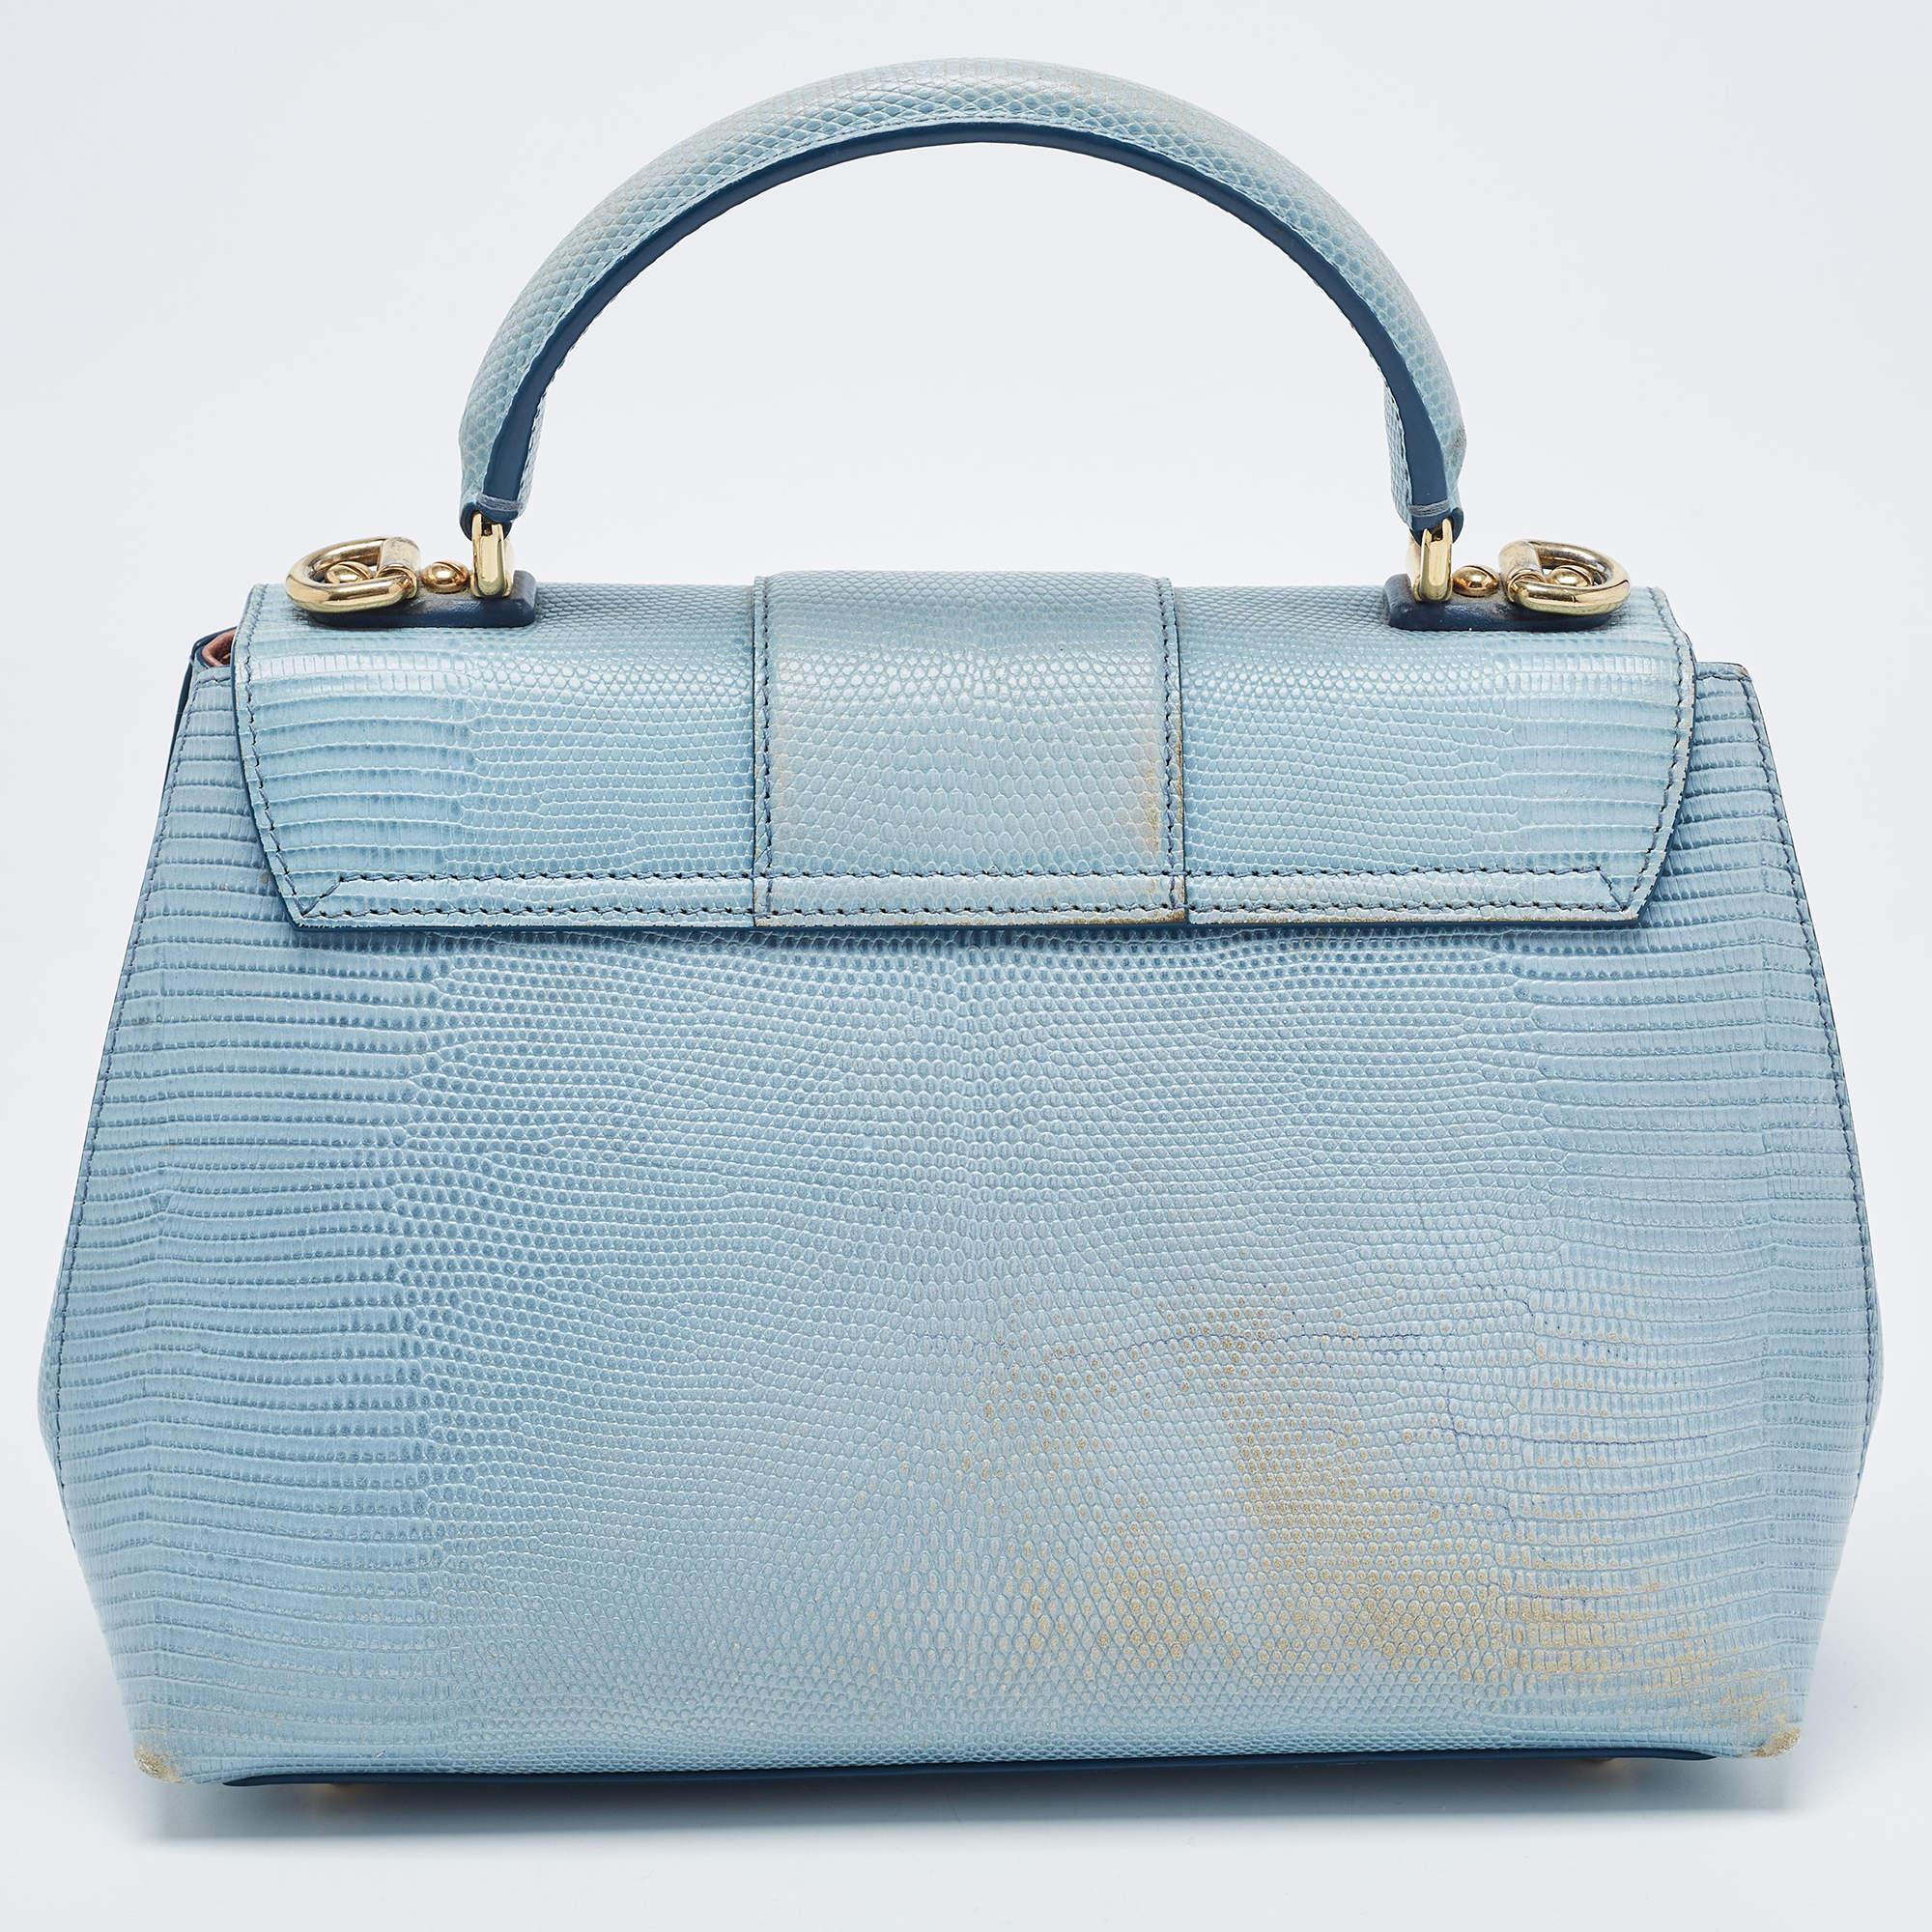 Dolce & Gabbana Blue Lizard Embossed Leather Small Lucia Top Handle Bag 3